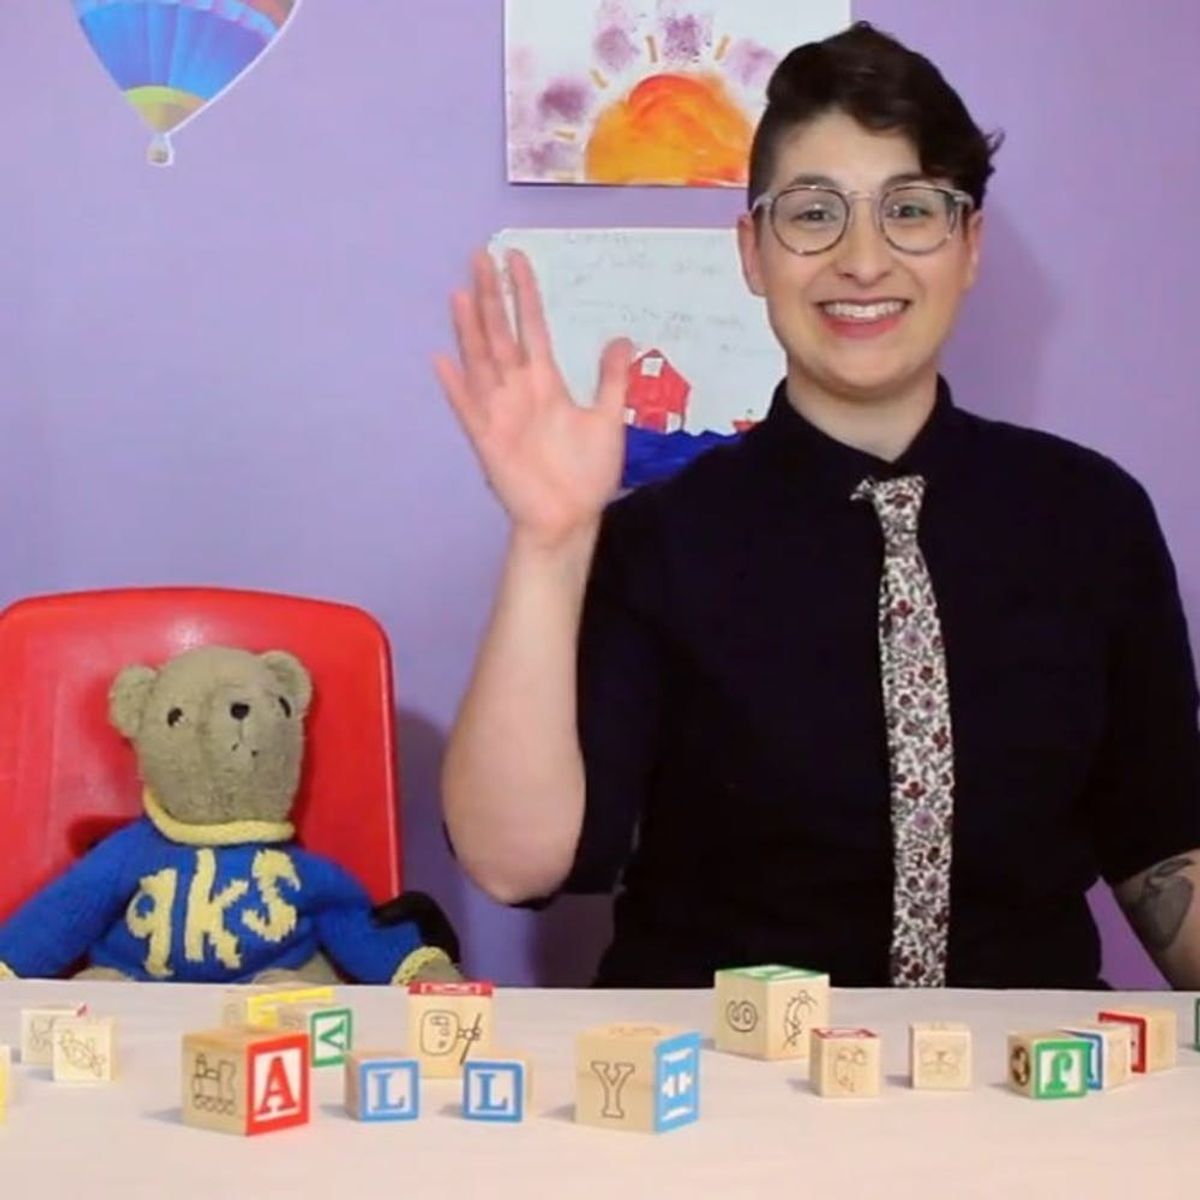 This YouTube Star Is Teaching Preschoolers (and Parents) About LGBTQ+ Issues